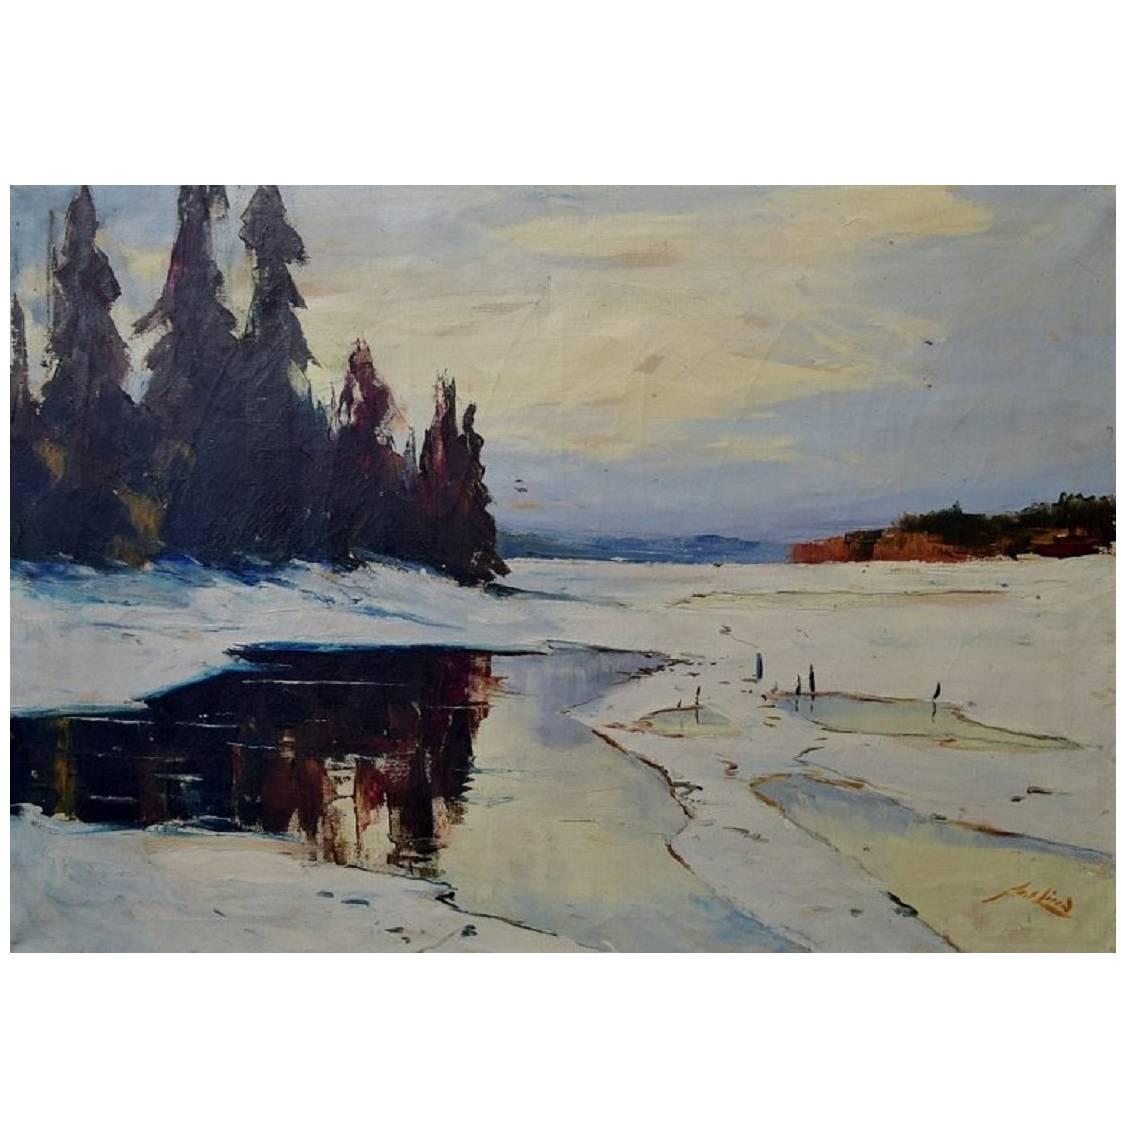 Axel Lind Winter Landscape with Forest, Oil on Canvas